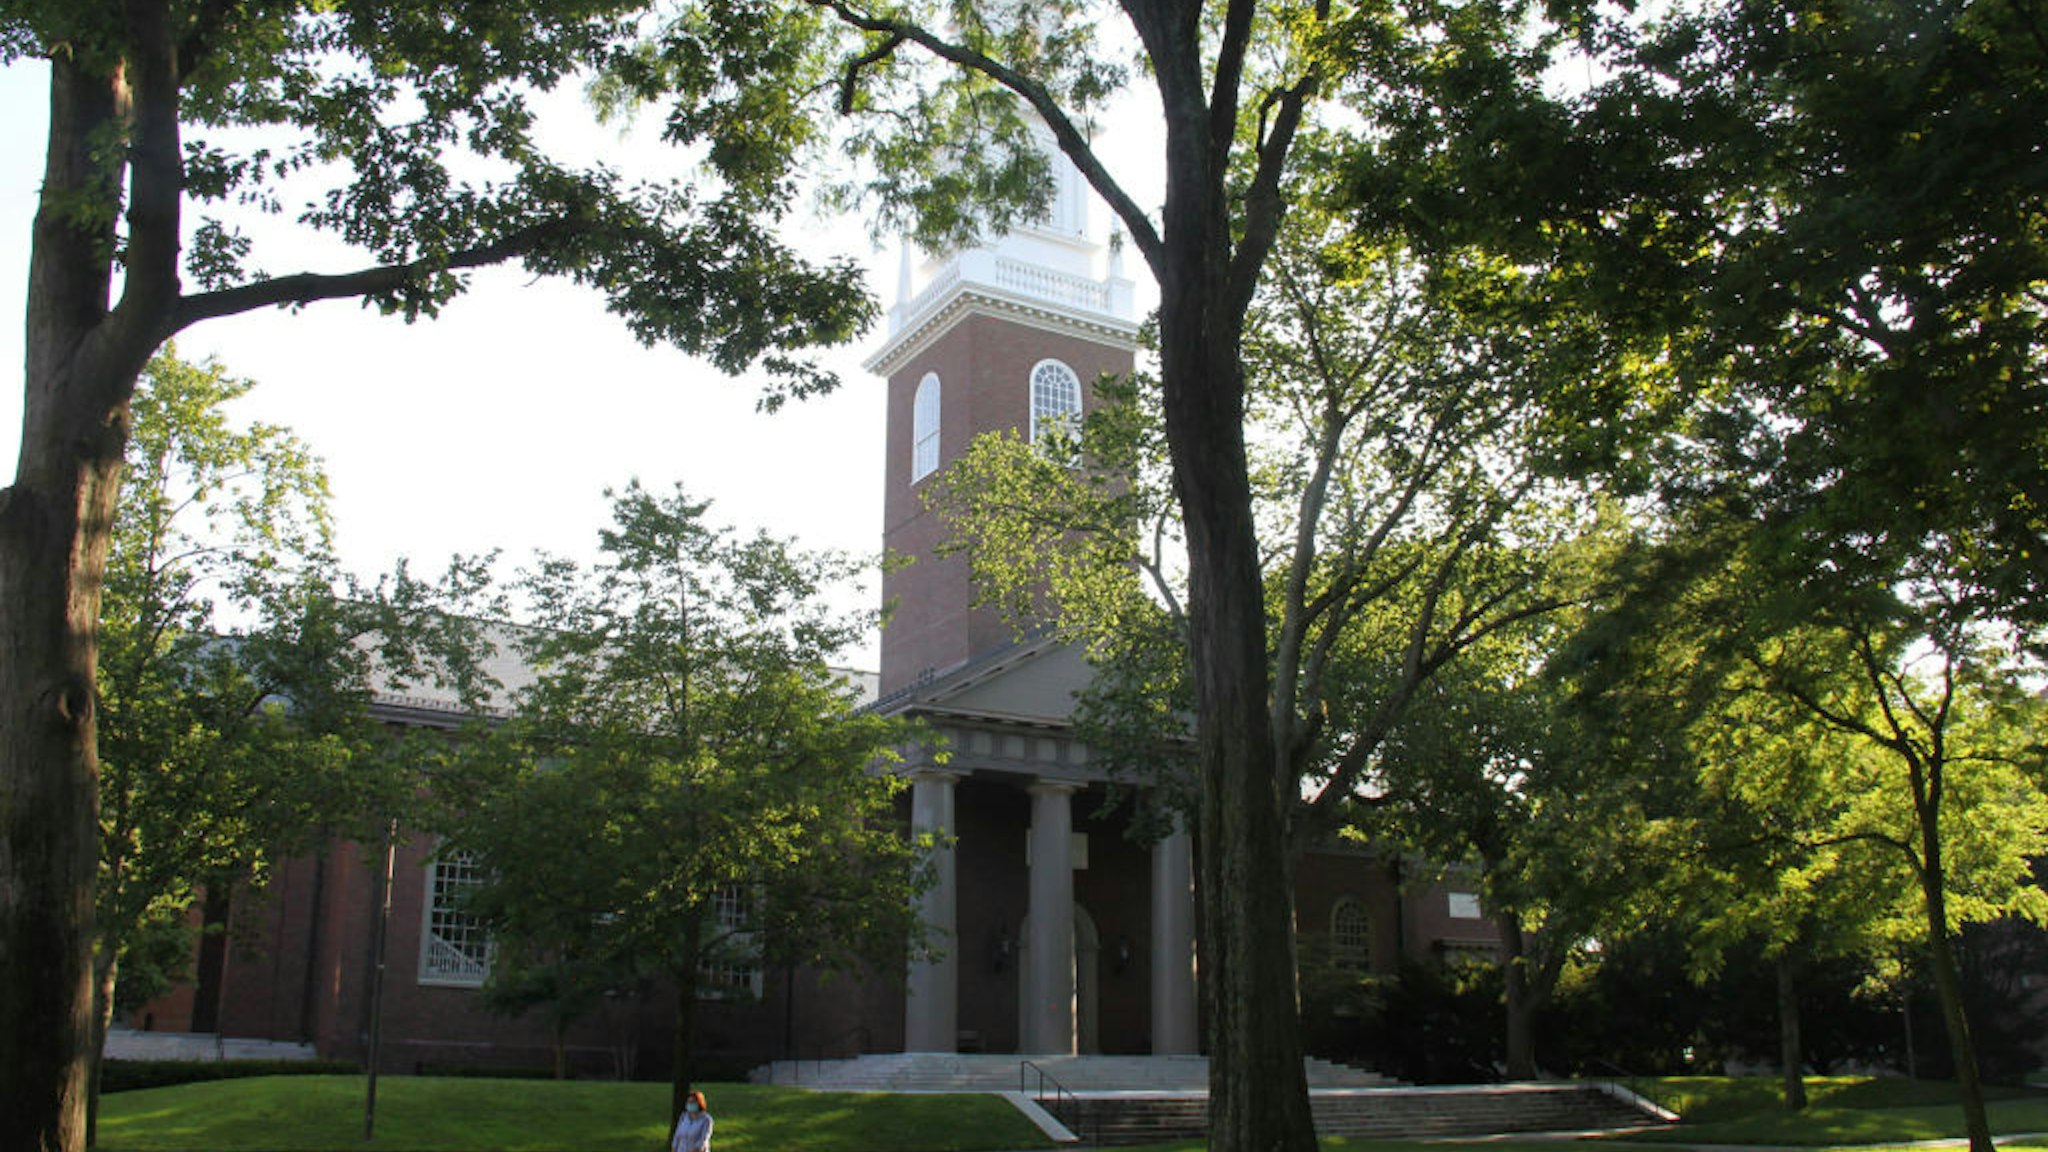 Photo taken on July 14, 2020 shows a view of the campus of Harvard University in Cambridge of Massachusetts, the United States. The U.S. government has rescinded a new rule that could have denied international students their stay in the country if they only attend online courses in the coming fall semester, a federal judge in Boston, Massachusetts said Tuesday